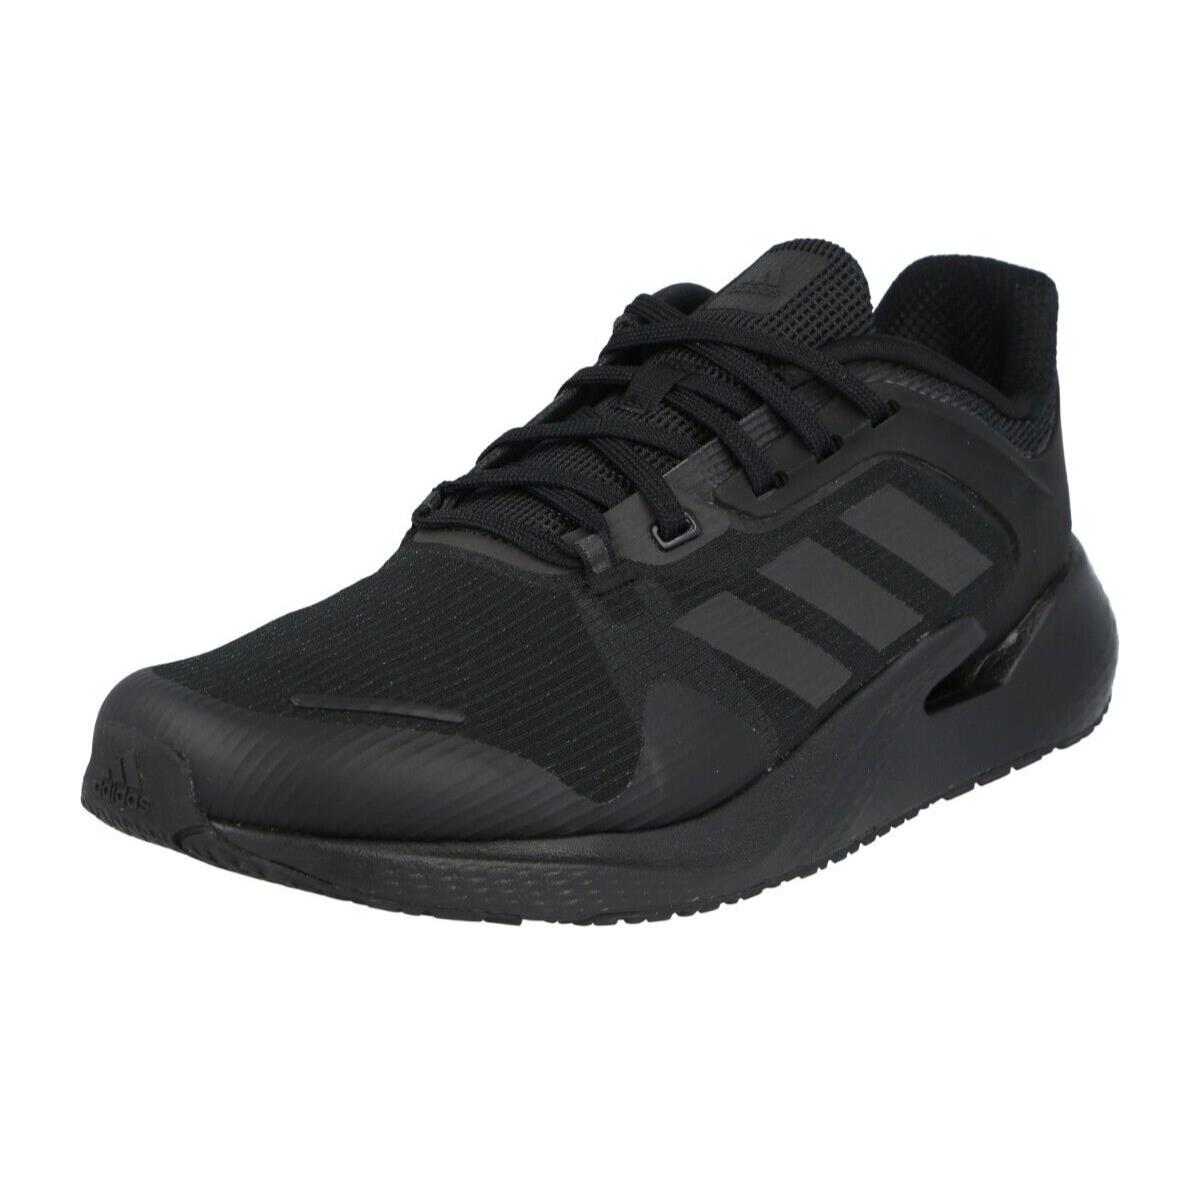 Adidas Mens Alphatorsion Trainers Running Shoes - Black 10